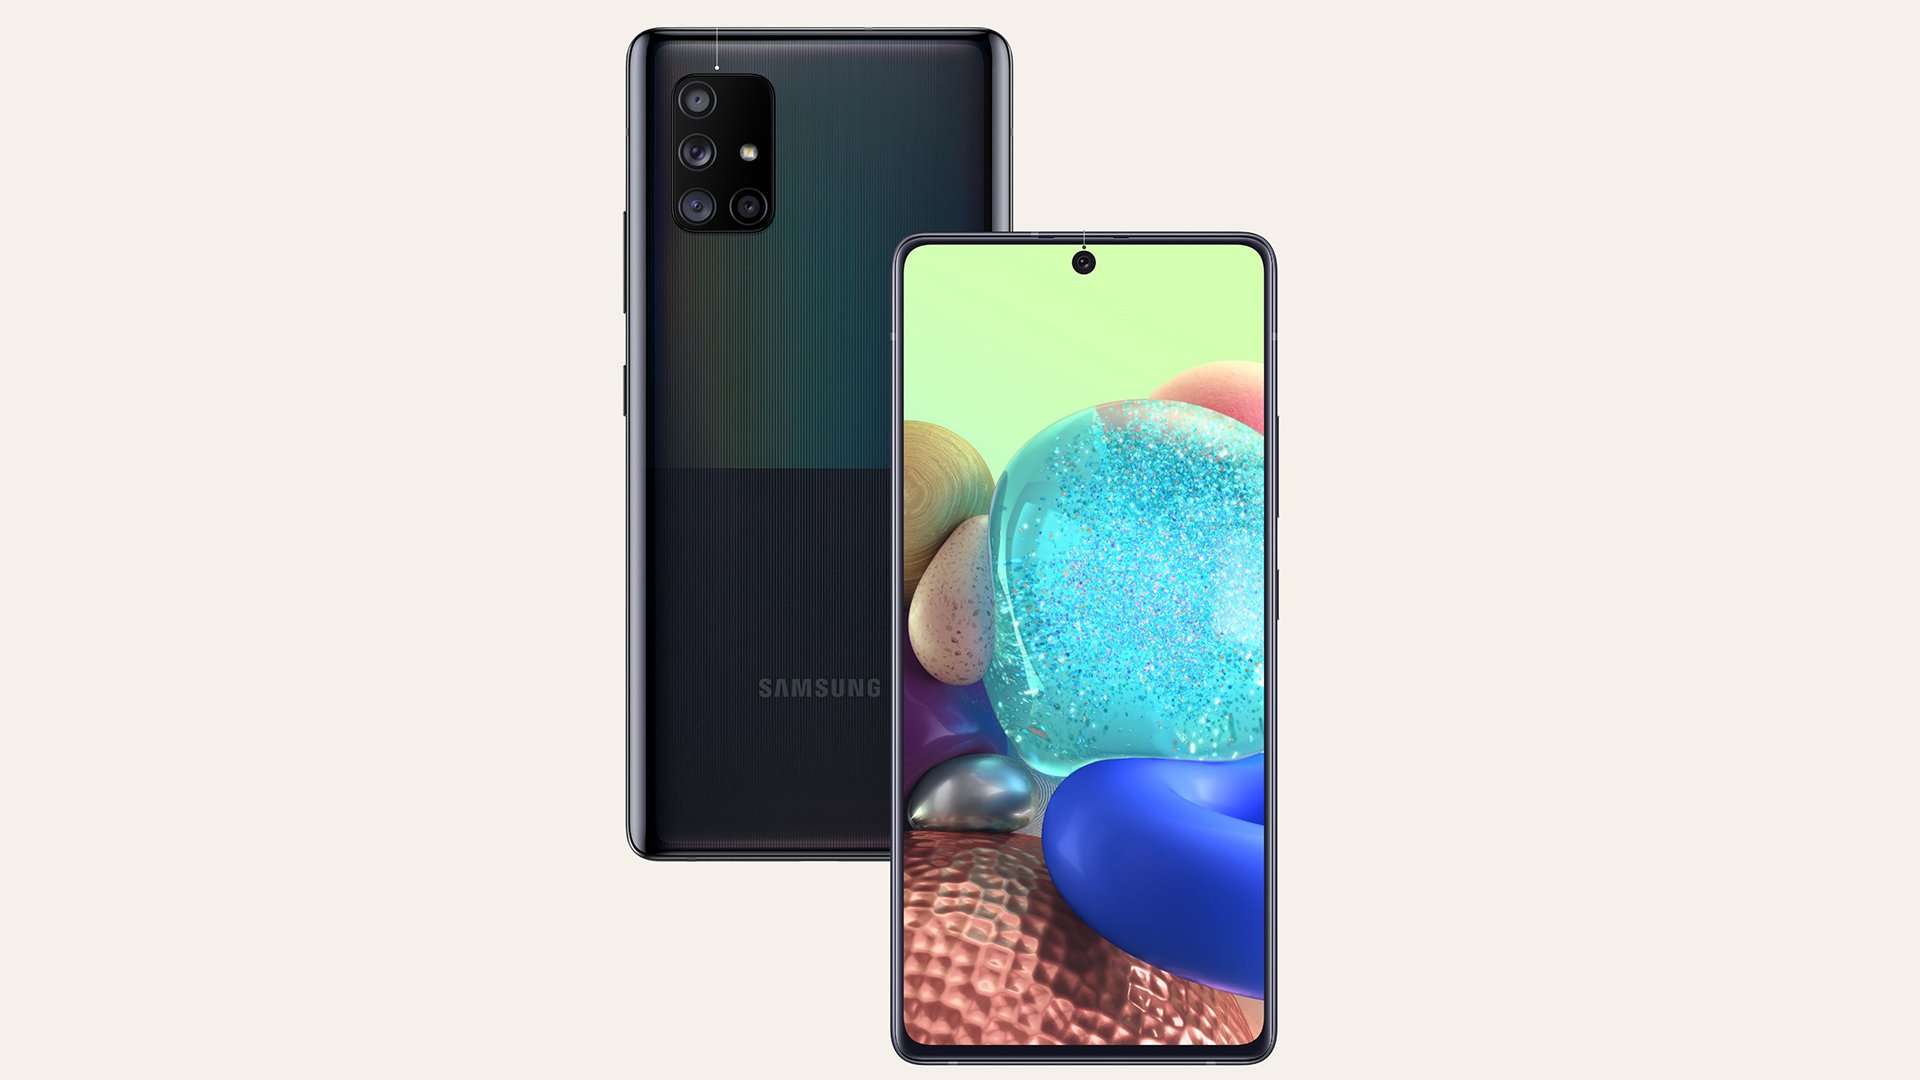 Galaxy A71 5G picks up the July 2021 security update - SamMobile